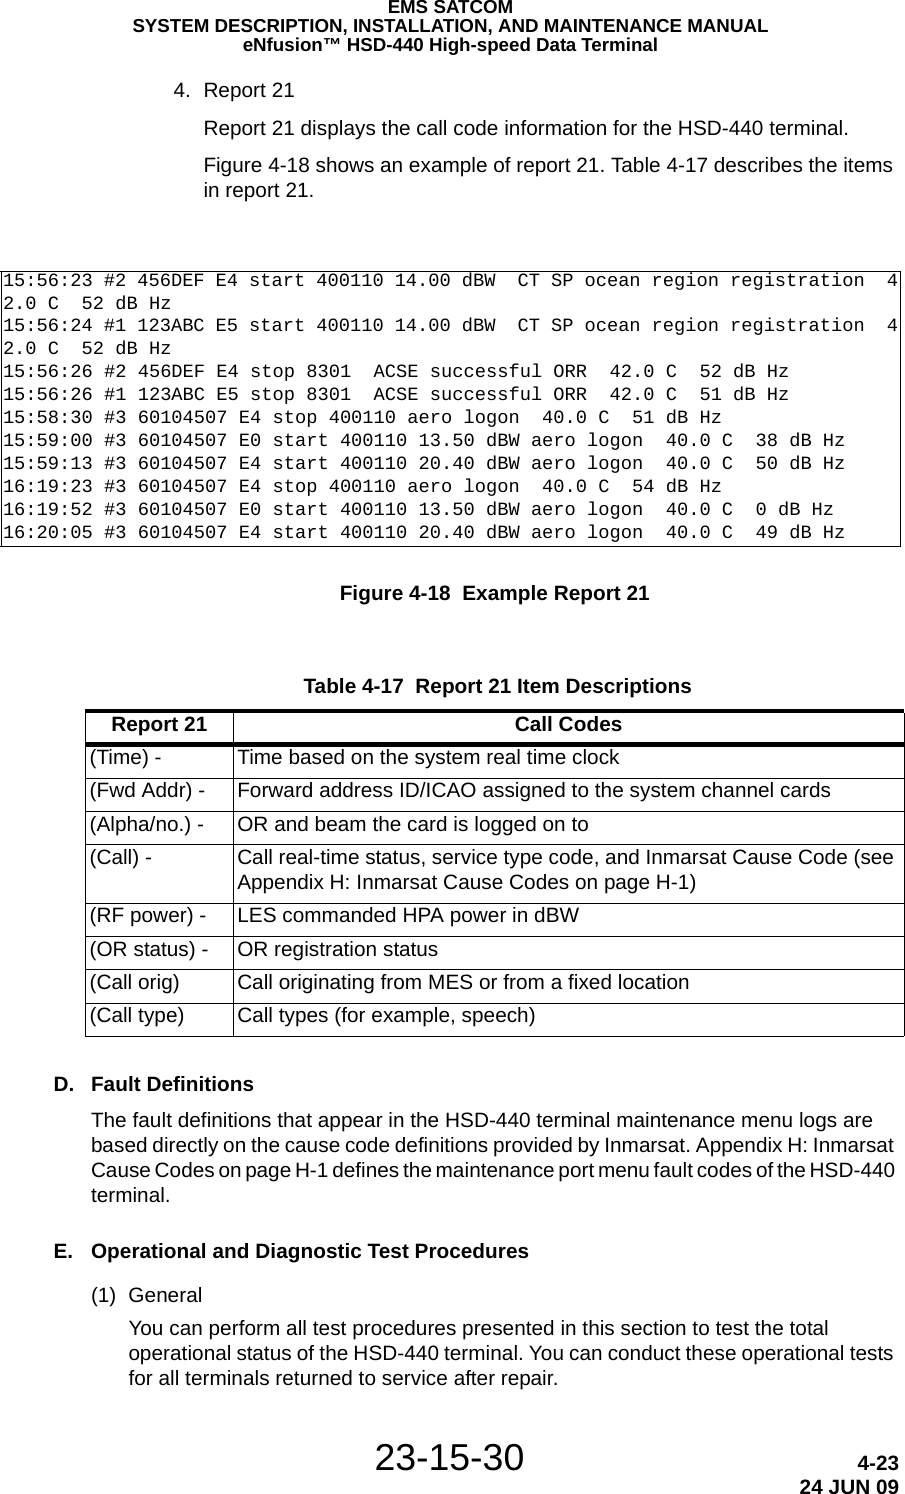 EMS SATCOMSYSTEM DESCRIPTION, INSTALLATION, AND MAINTENANCE MANUALeNfusion™ HSD-440 High-speed Data Terminal23-15-30 4-2324 JUN 094. Report 21Report 21 displays the call code information for the HSD-440 terminal.Figure 4-18 shows an example of report 21. Table 4-17 describes the items in report 21.Figure 4-18  Example Report 21D. Fault DefinitionsThe fault definitions that appear in the HSD-440 terminal maintenance menu logs are based directly on the cause code definitions provided by Inmarsat. Appendix H: Inmarsat Cause Codes on page H-1 defines the maintenance port menu fault codes of the HSD-440 terminal.E. Operational and Diagnostic Test Procedures(1) GeneralYou can perform all test procedures presented in this section to test the total operational status of the HSD-440 terminal. You can conduct these operational tests for all terminals returned to service after repair.15:56:23 #2 456DEF E4 start 400110 14.00 dBW  CT SP ocean region registration  42.0 C  52 dB Hz15:56:24 #1 123ABC E5 start 400110 14.00 dBW  CT SP ocean region registration  42.0 C  52 dB Hz15:56:26 #2 456DEF E4 stop 8301  ACSE successful ORR  42.0 C  52 dB Hz15:56:26 #1 123ABC E5 stop 8301  ACSE successful ORR  42.0 C  51 dB Hz15:58:30 #3 60104507 E4 stop 400110 aero logon  40.0 C  51 dB Hz15:59:00 #3 60104507 E0 start 400110 13.50 dBW aero logon  40.0 C  38 dB Hz15:59:13 #3 60104507 E4 start 400110 20.40 dBW aero logon  40.0 C  50 dB Hz16:19:23 #3 60104507 E4 stop 400110 aero logon  40.0 C  54 dB Hz16:19:52 #3 60104507 E0 start 400110 13.50 dBW aero logon  40.0 C  0 dB Hz16:20:05 #3 60104507 E4 start 400110 20.40 dBW aero logon  40.0 C  49 dB Hz Table 4-17  Report 21 Item Descriptions Report 21 Call Codes(Time) - Time based on the system real time clock(Fwd Addr) - Forward address ID/ICAO assigned to the system channel cards(Alpha/no.) - OR and beam the card is logged on to(Call) - Call real-time status, service type code, and Inmarsat Cause Code (see Appendix H: Inmarsat Cause Codes on page H-1)(RF power) - LES commanded HPA power in dBW(OR status) - OR registration status(Call orig) Call originating from MES or from a fixed location(Call type) Call types (for example, speech)